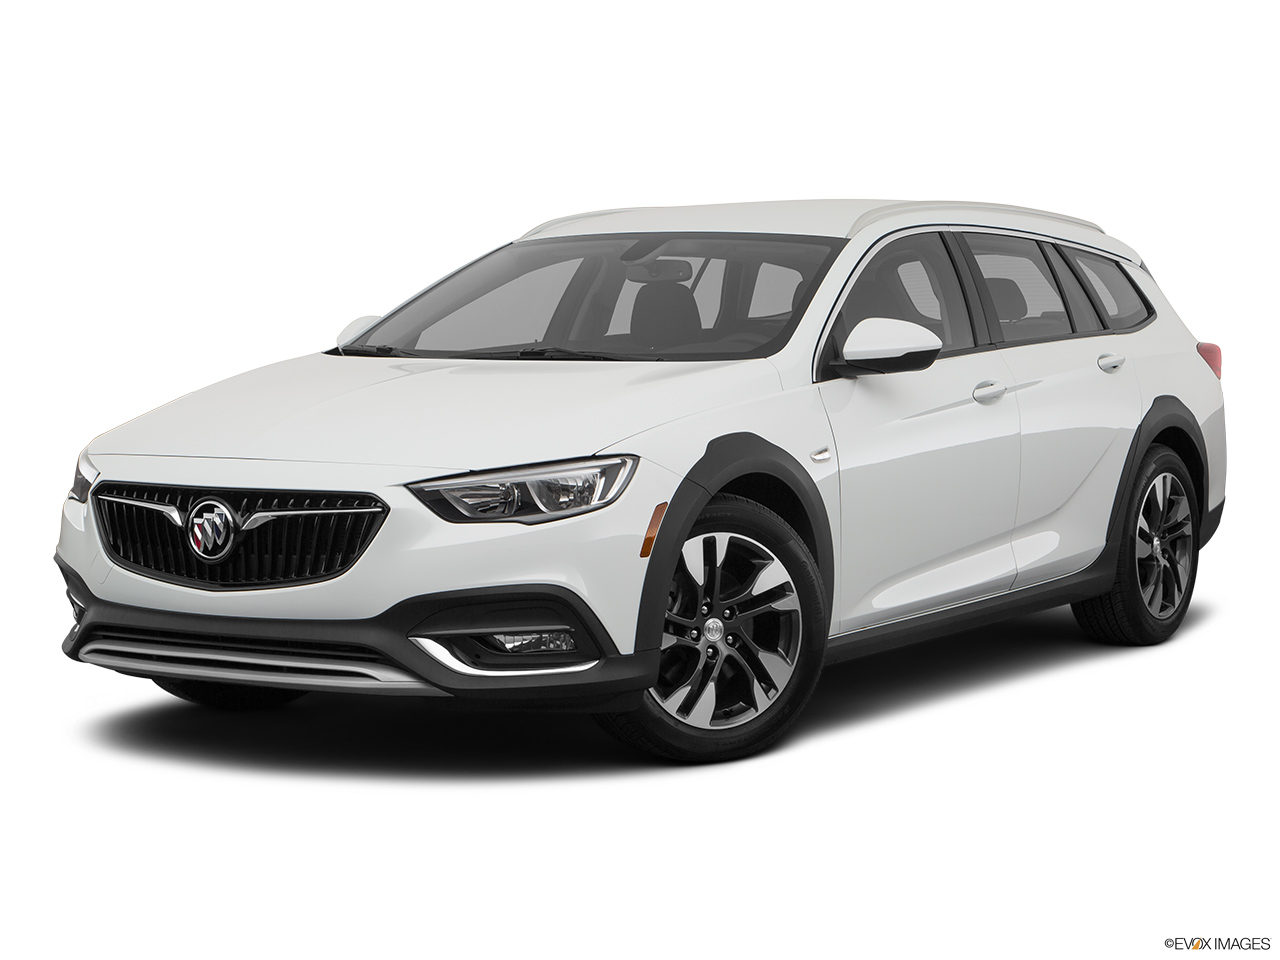 2018 Buick Regal Tourx  Preferred Front angle medium view. 